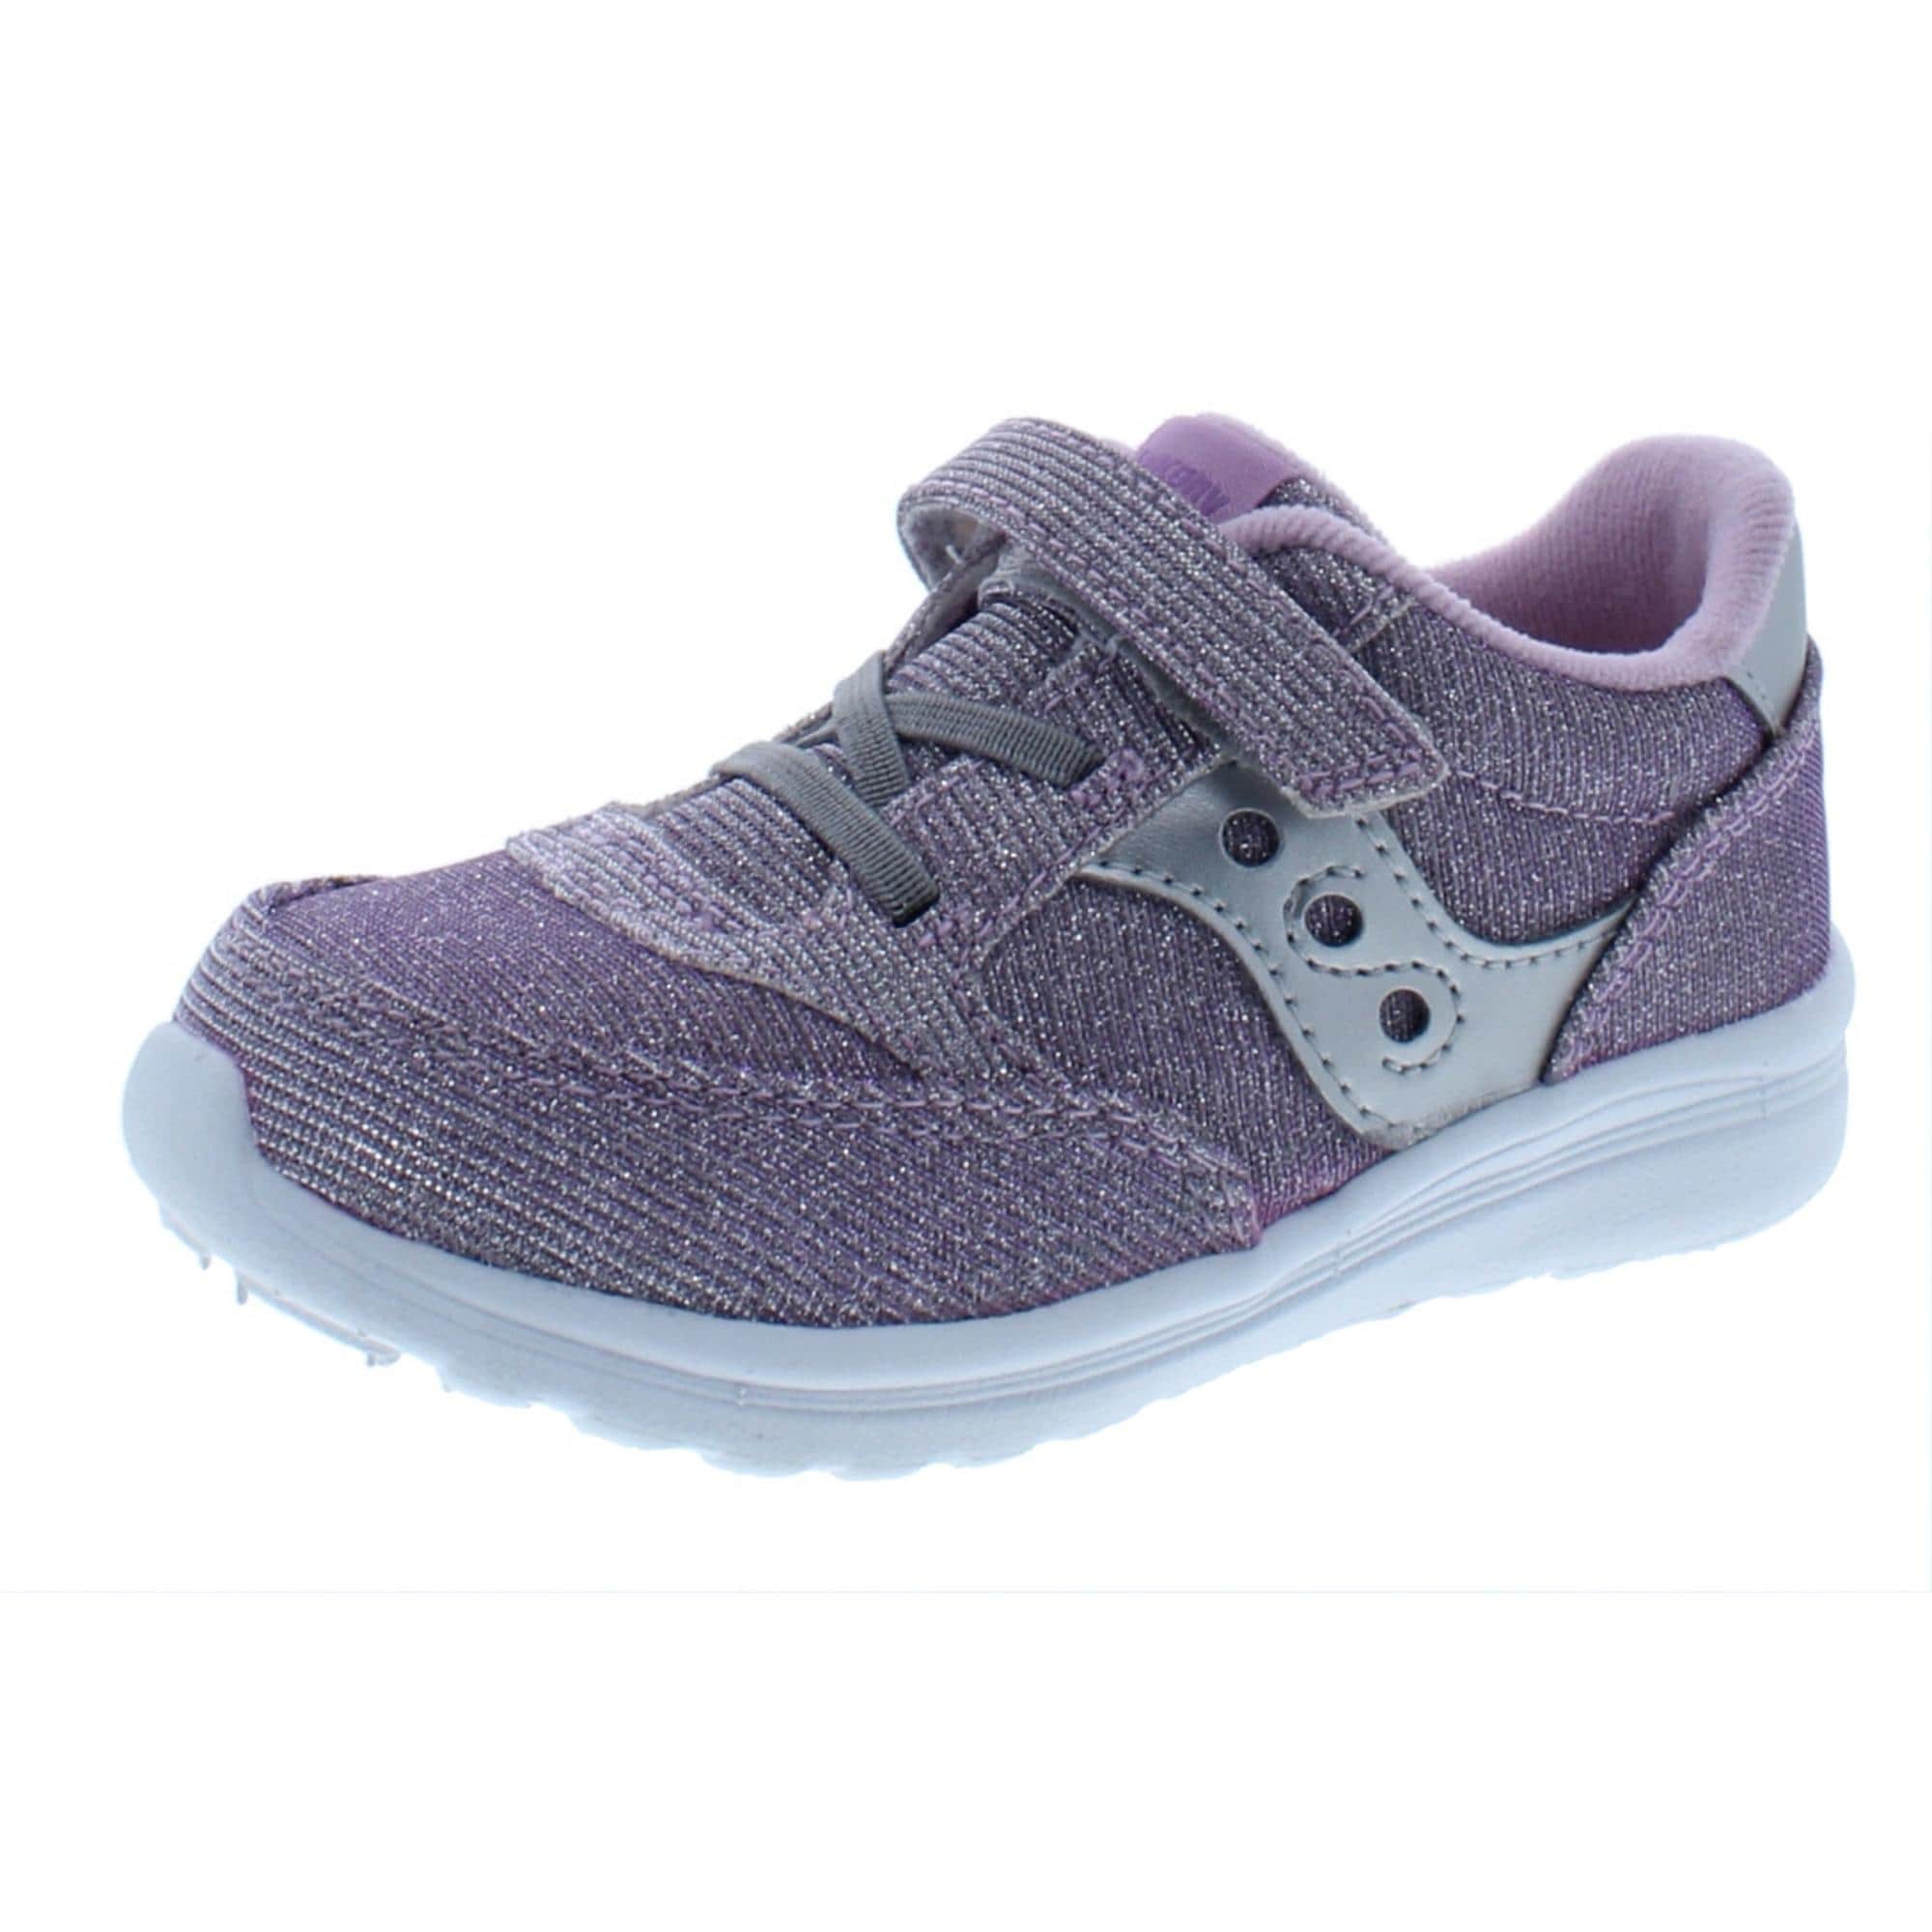 saucony girls shoes